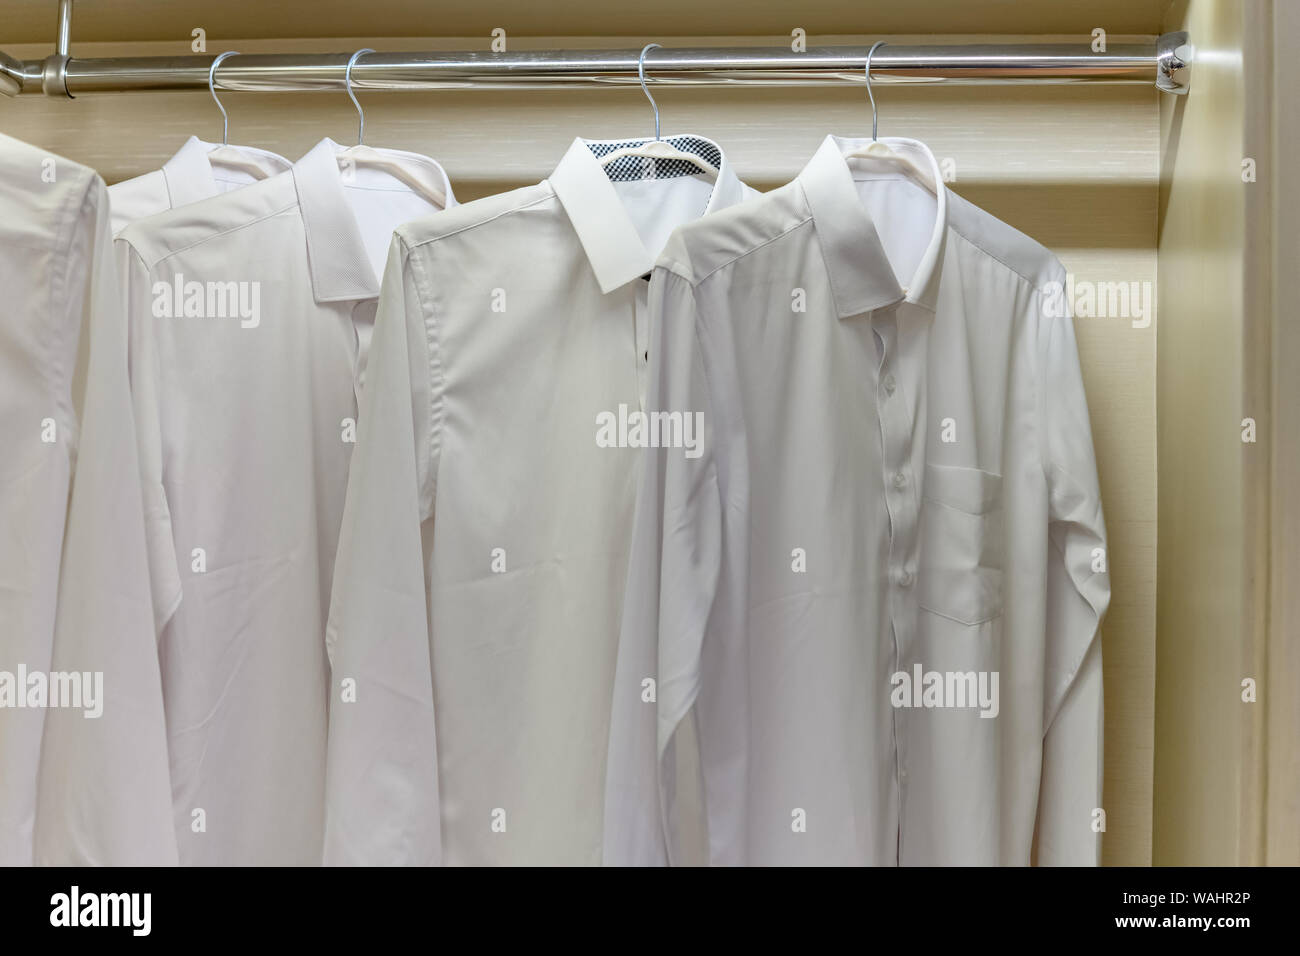 shirts hanging on clothing rack in an indoor closet Stock Photo